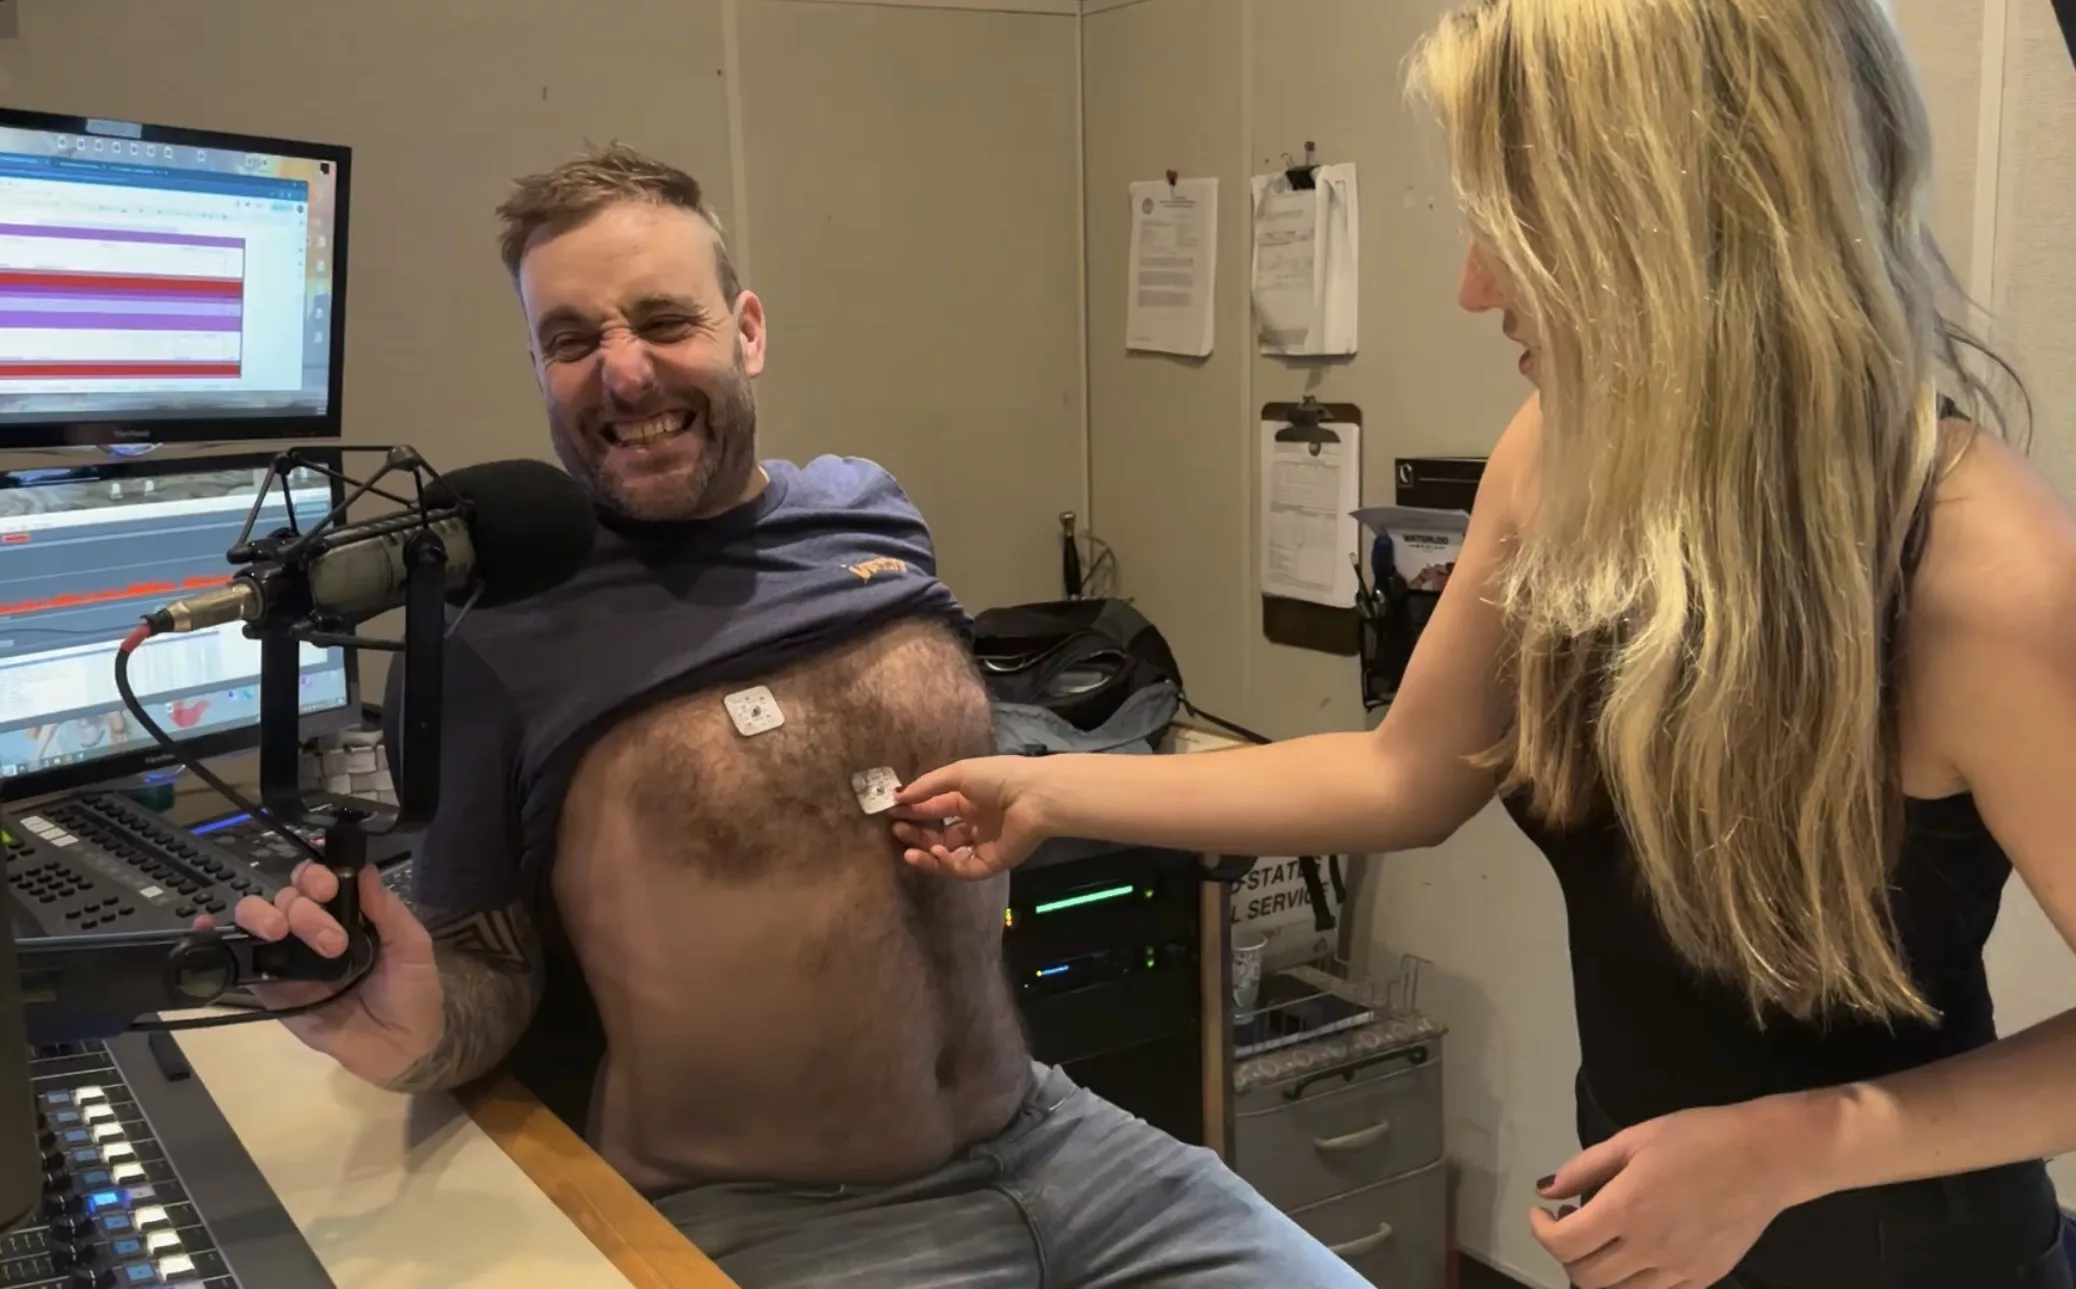 How NOT to Wax Your Chest